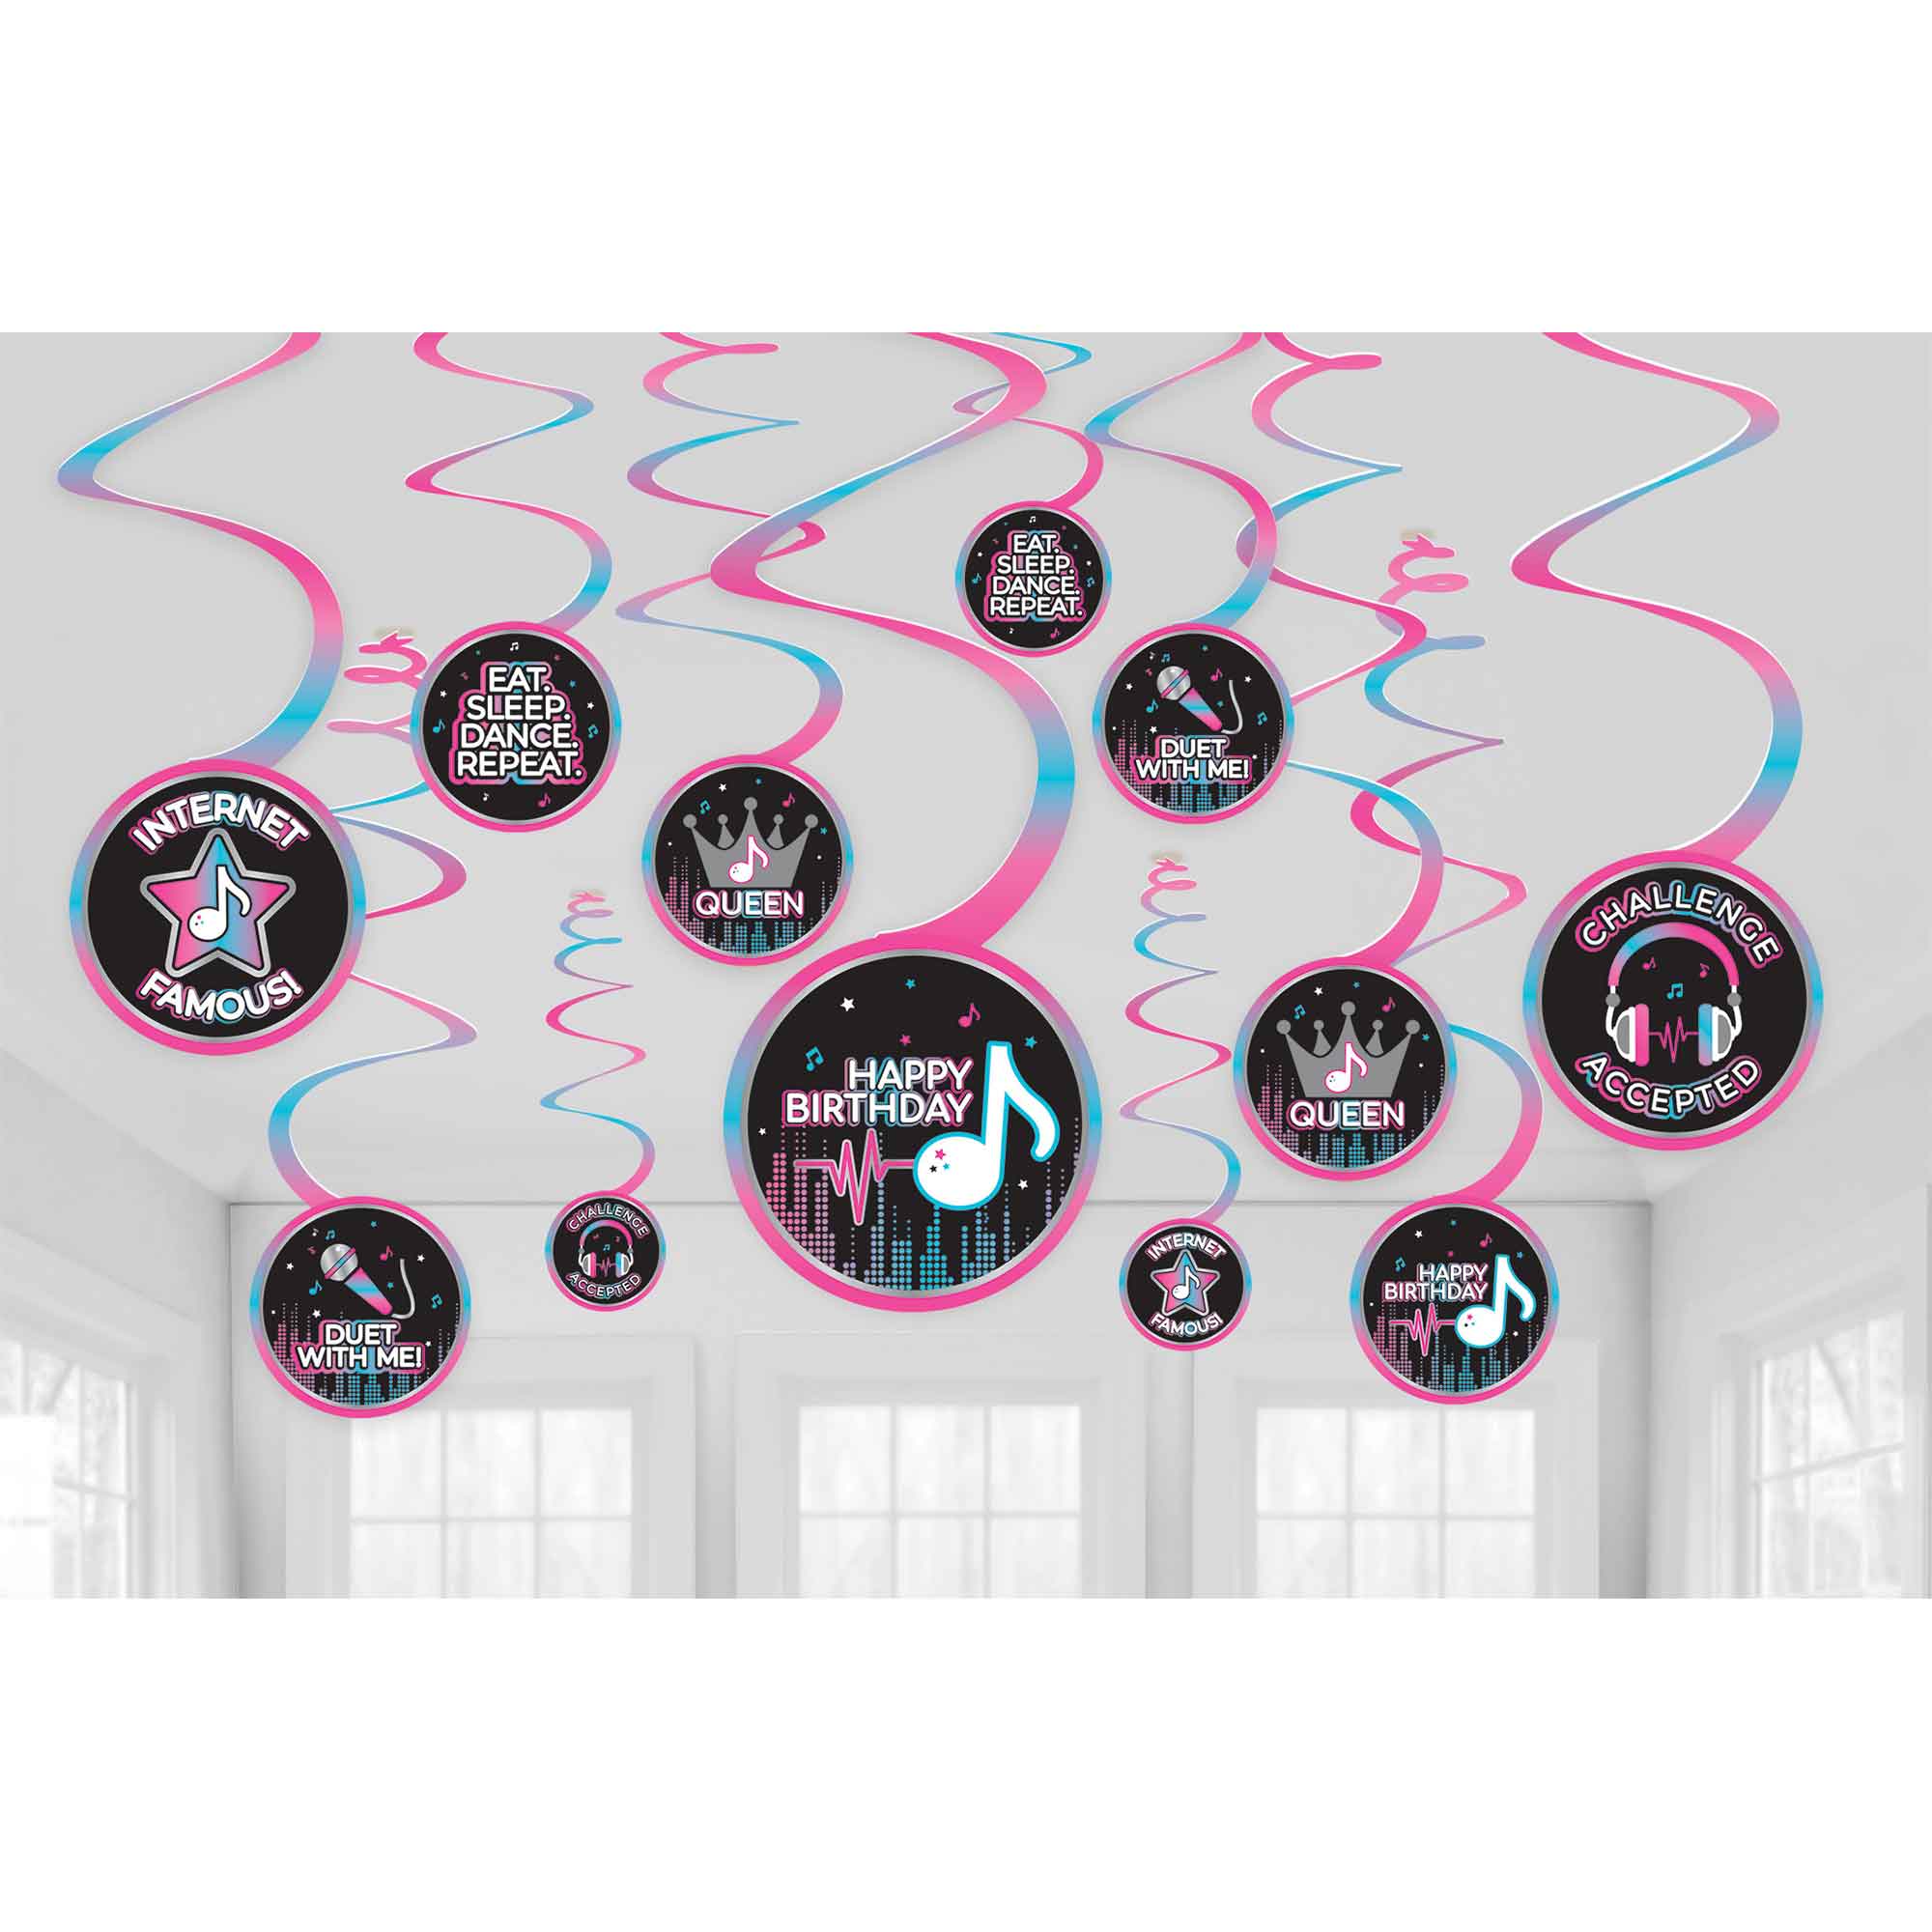 Internet Famous Birthday Spiral Swirls Hanging Decorations - 12 Pack Default Title